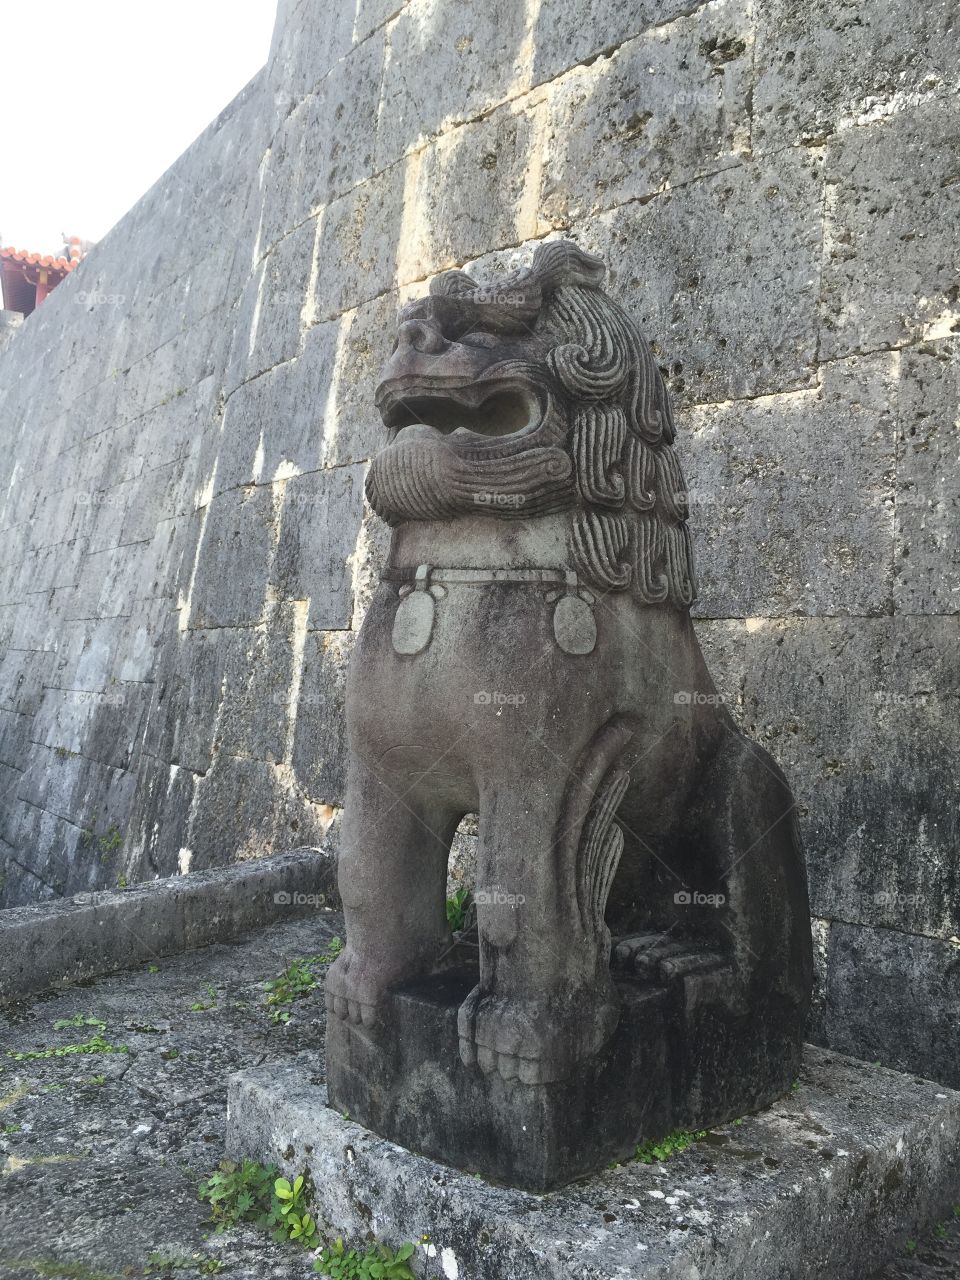 Shisa in Okinawa, Japan. This statue is referred to as a Shisa and protects the people and brings in happiness. 